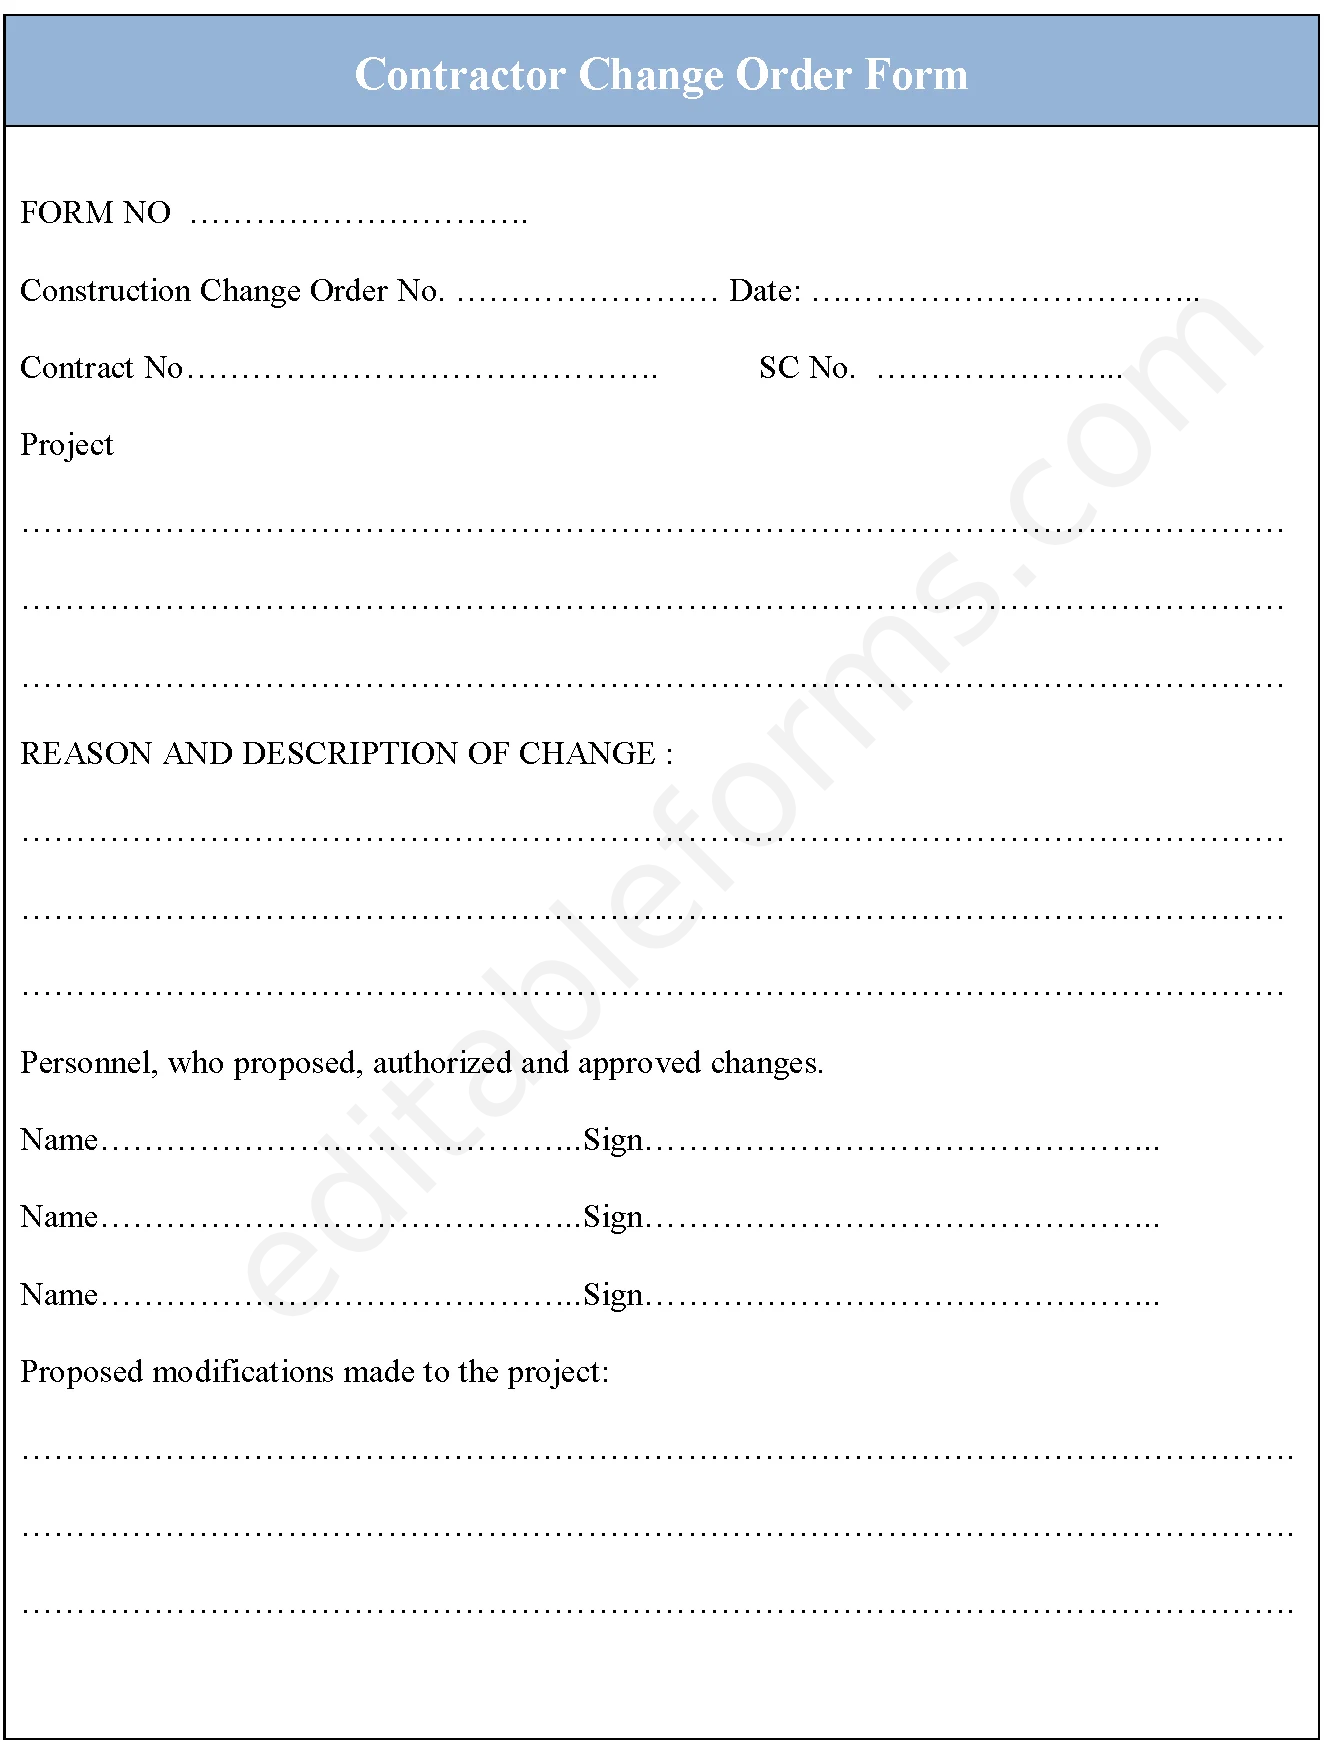 Contractor Change Order Fillable PDF template